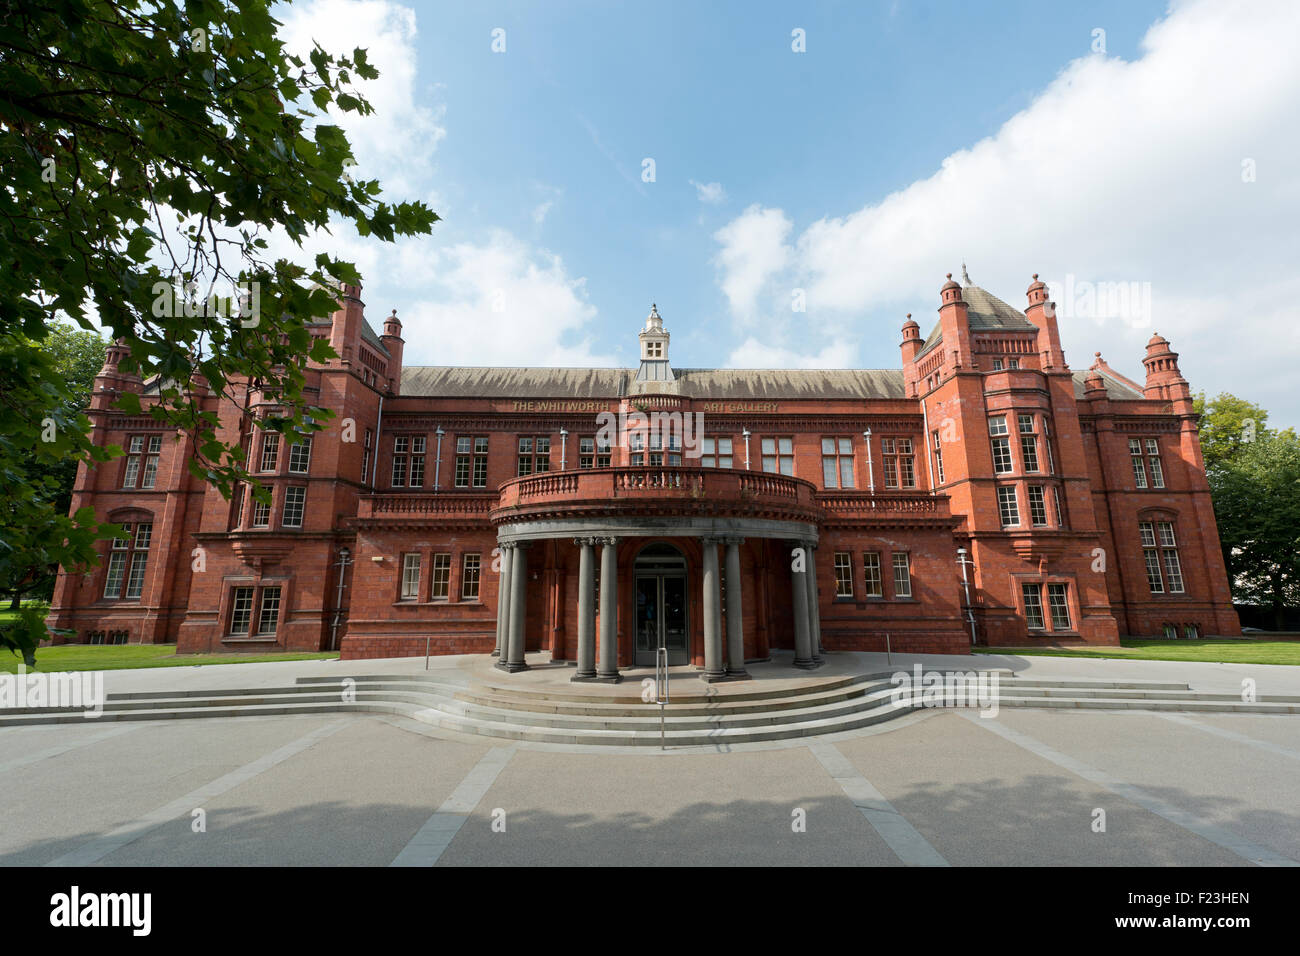 The recently refurbished Whitworth Art Gallery located on the Oxford Road campus of The University of Manchester. Stock Photo